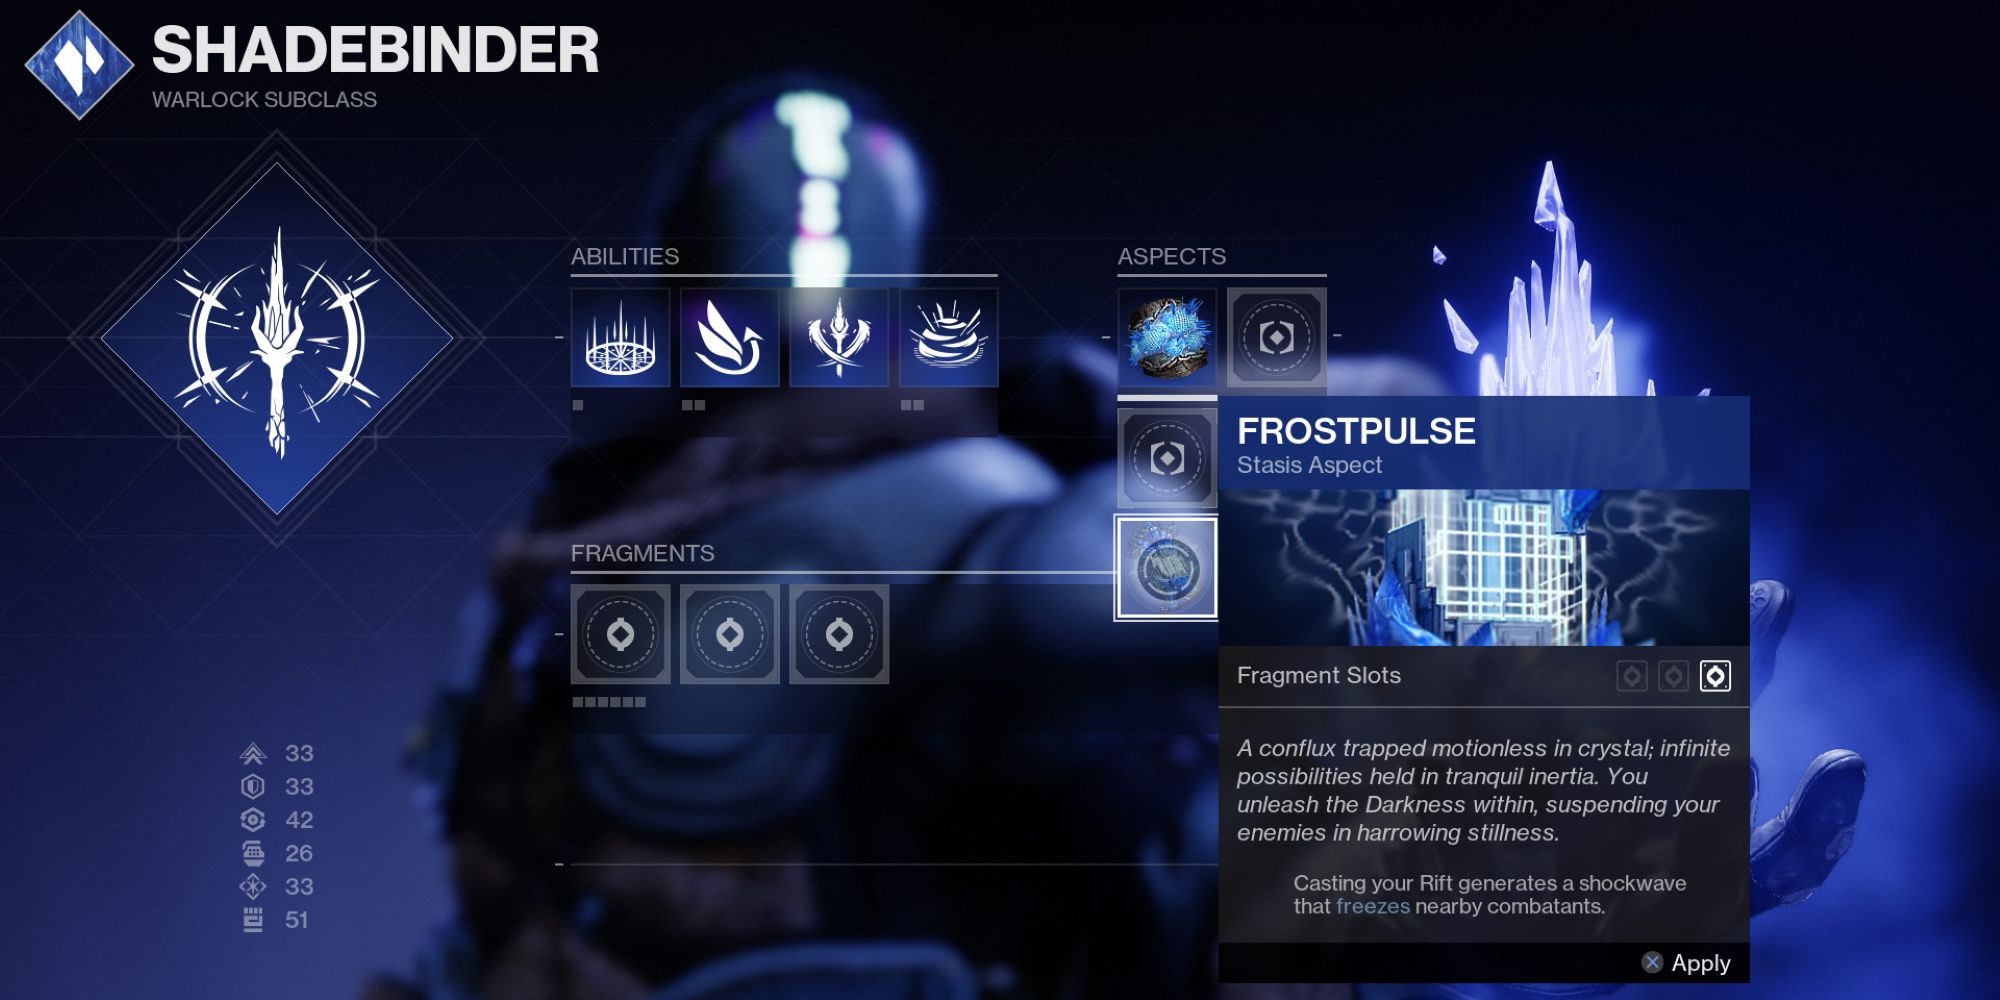 Destiny 2 new warlock stasis subclass menu with aspects and fragments